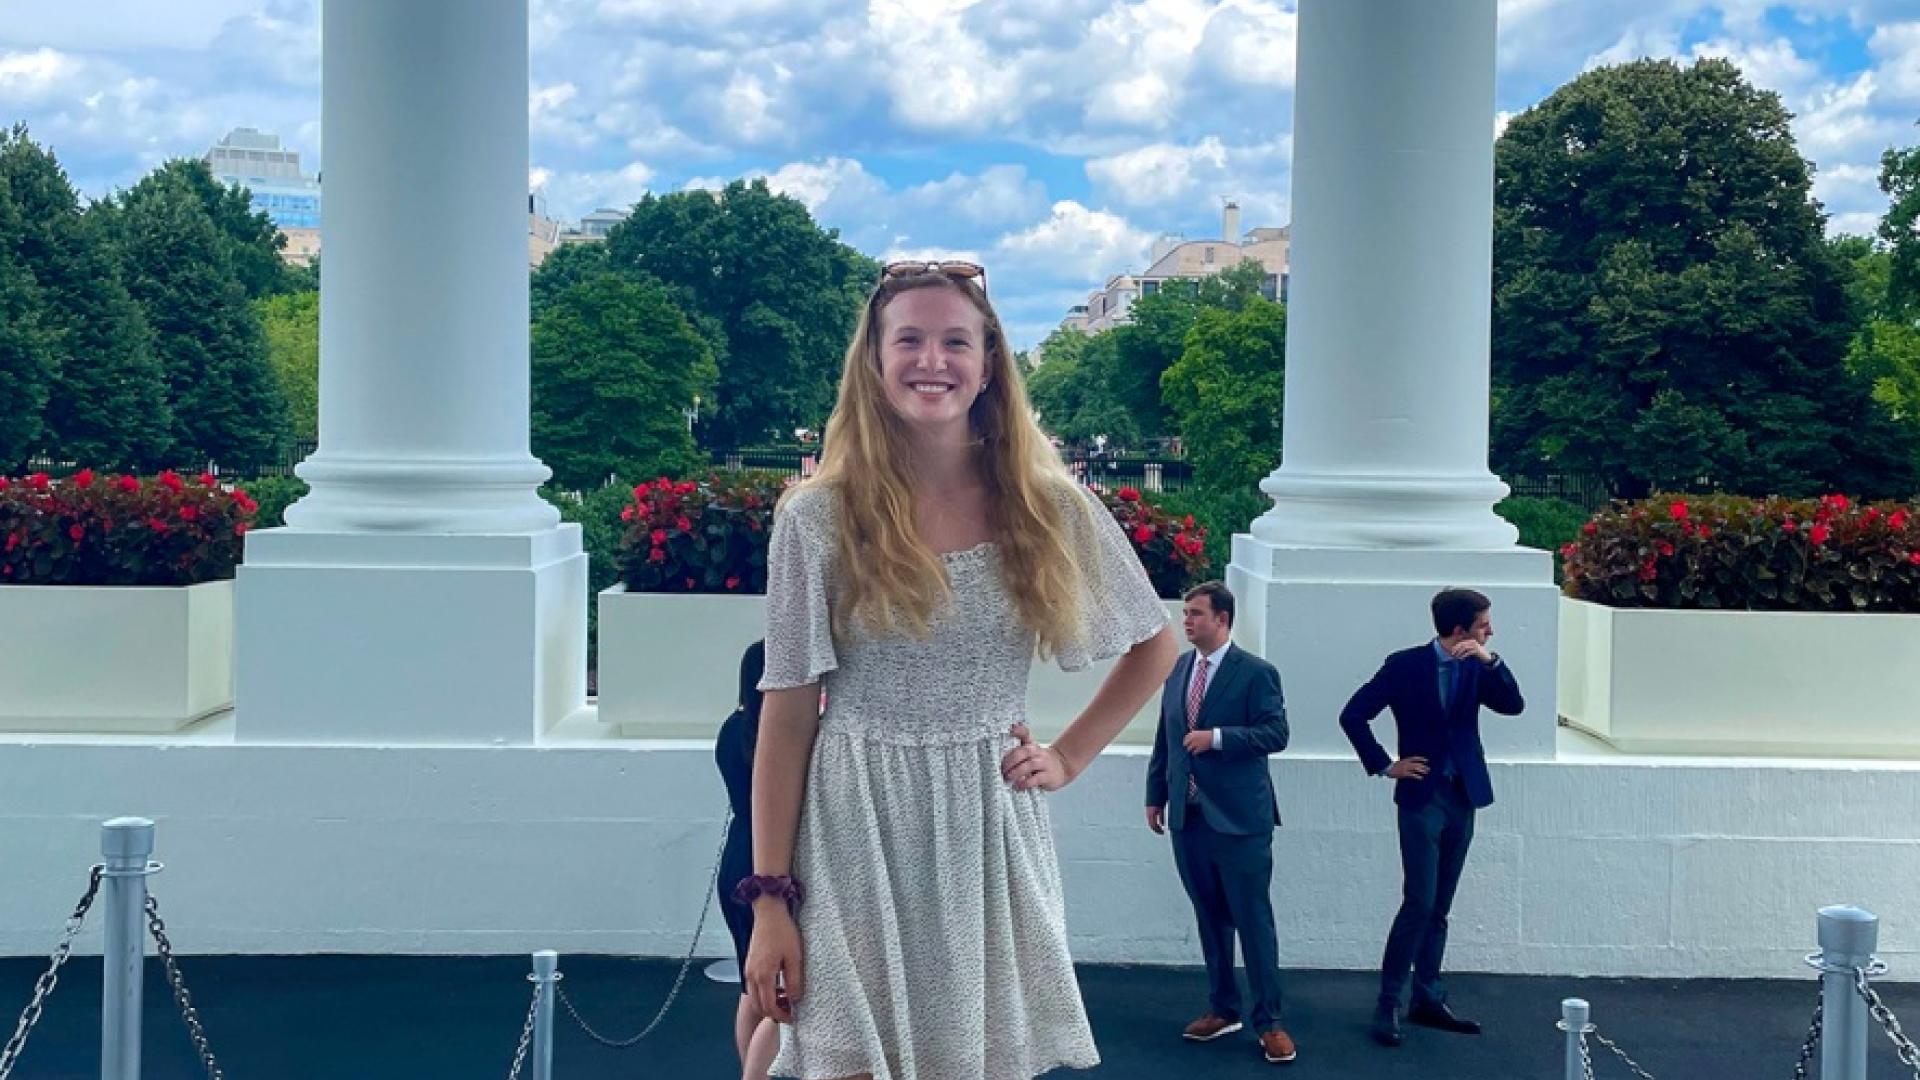 Abby Sherwood, intern at Interior’s Office of Wildland Fire, on a Demmer Scholars Program tour of the White House. Photo courtesy of Abby Sherwood.